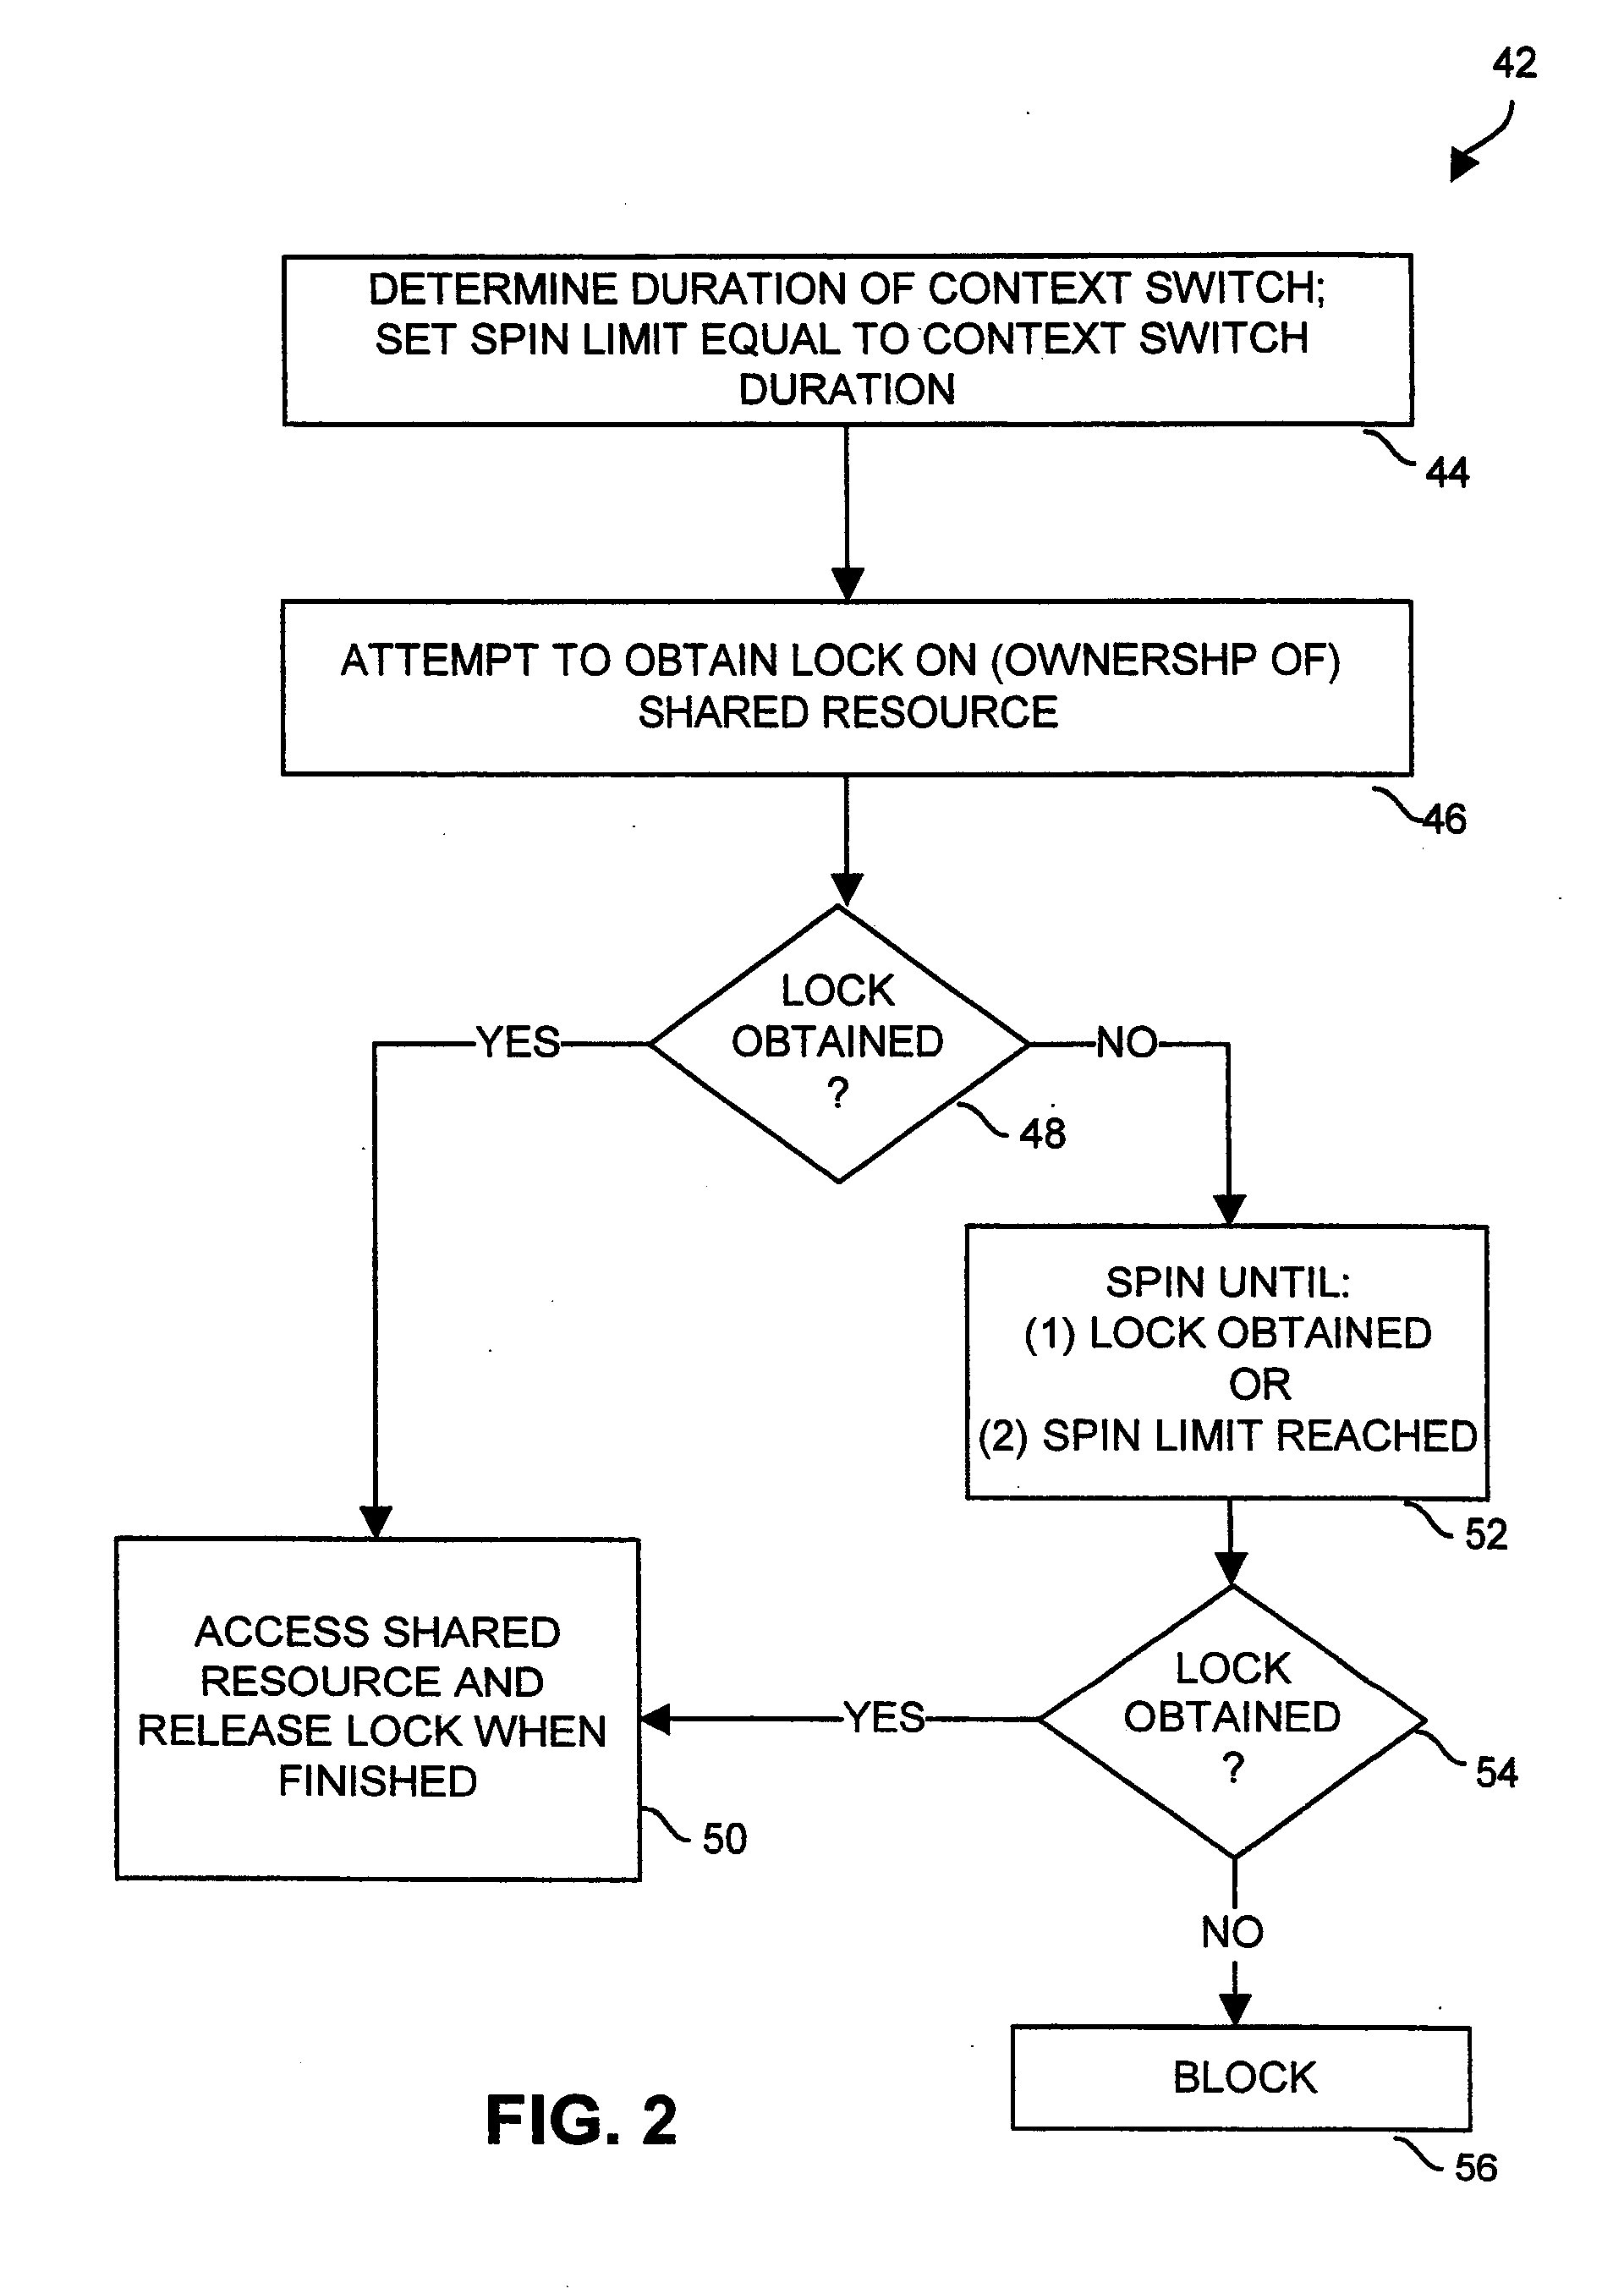 Adaptive spin-then-block mutual exclusion in multi-threaded processing